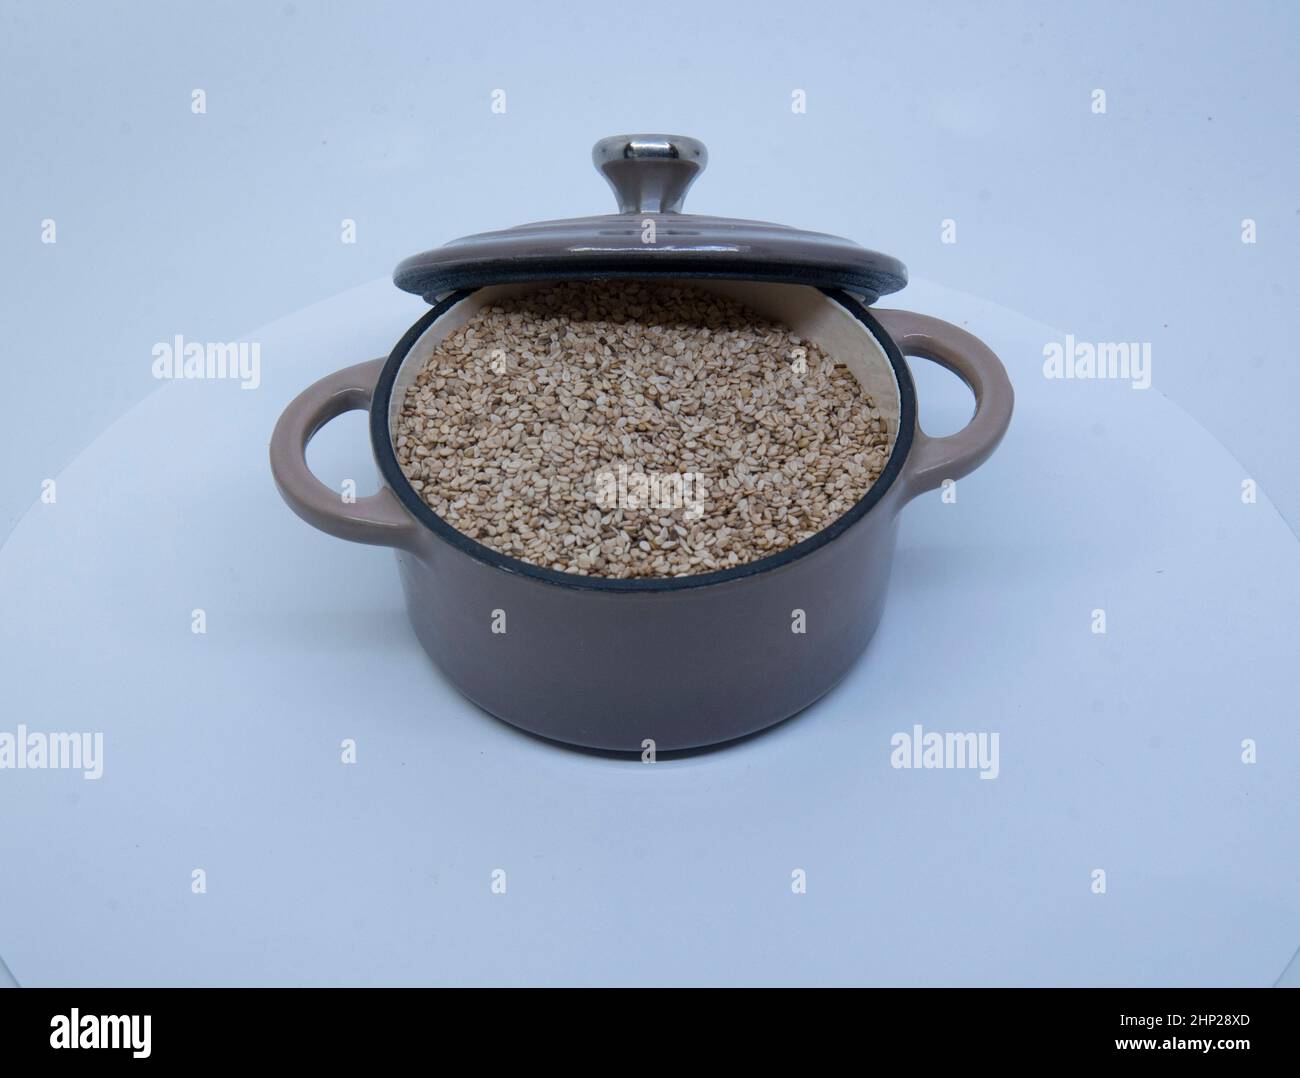 sesame seeds in a kitchen, a spice used for cooking Stock Photo